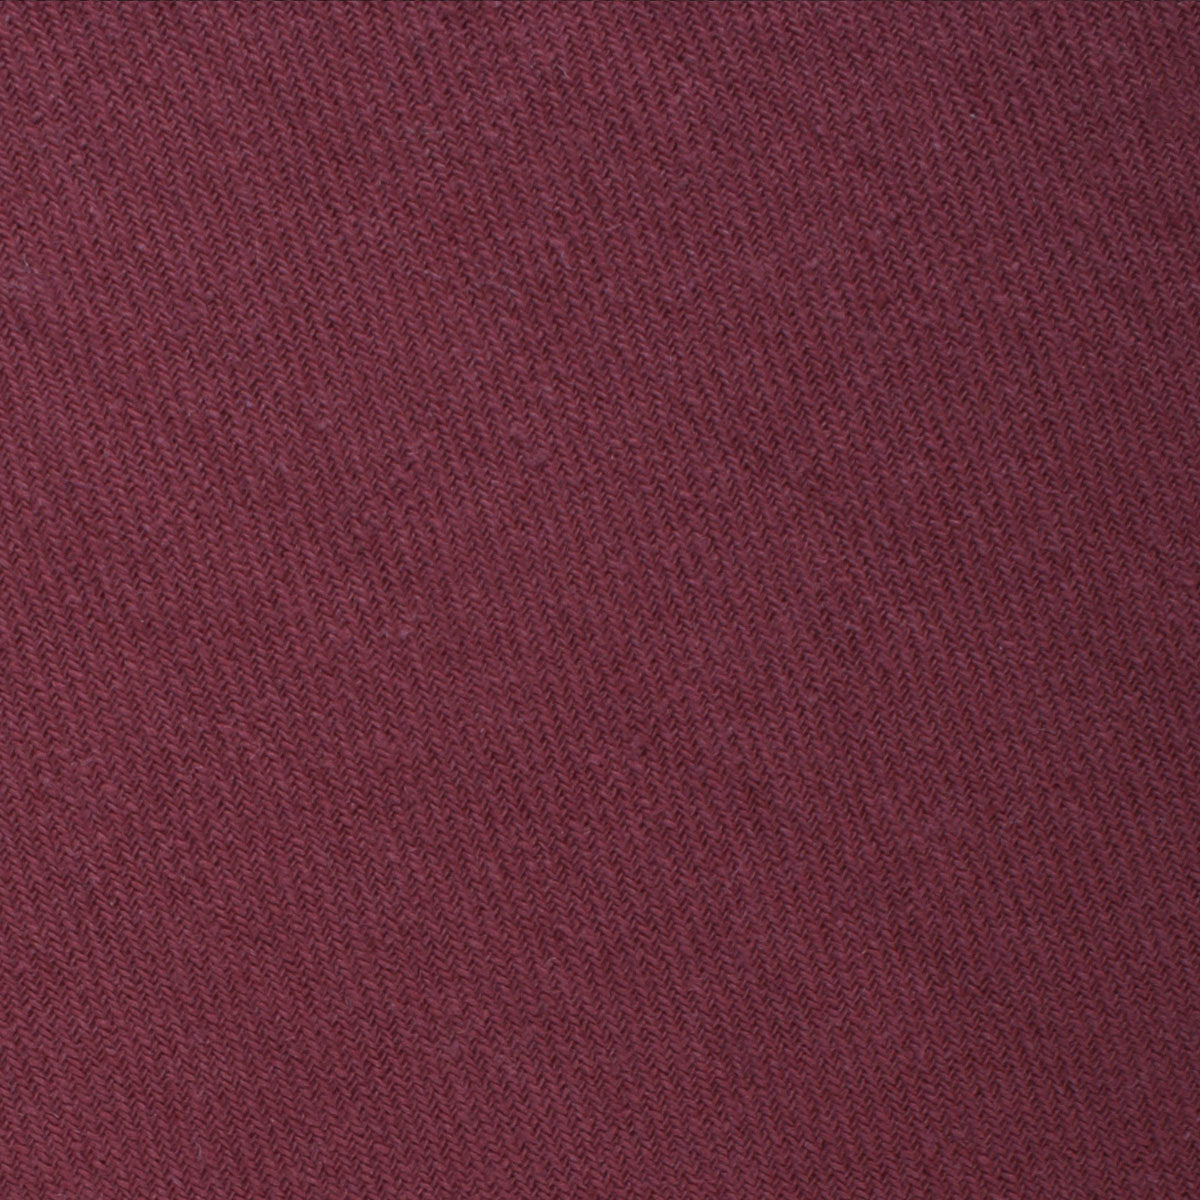 Mulberry Linen Fabric Swatch